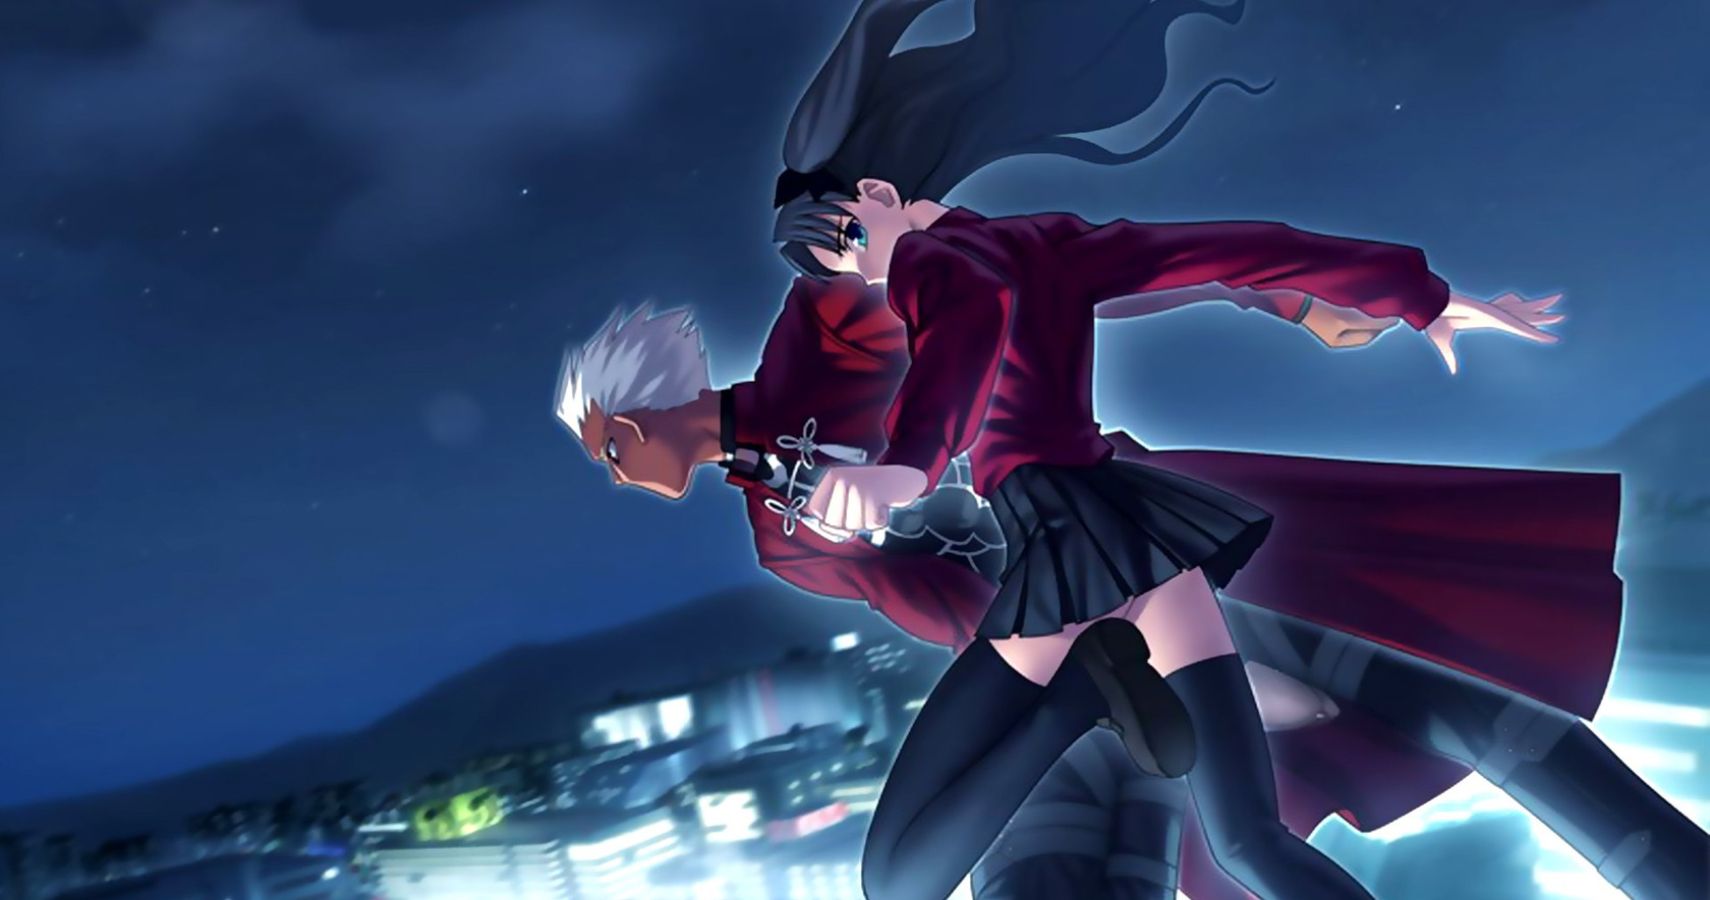 How do the Fate visual novels compare to the anime? - Quora